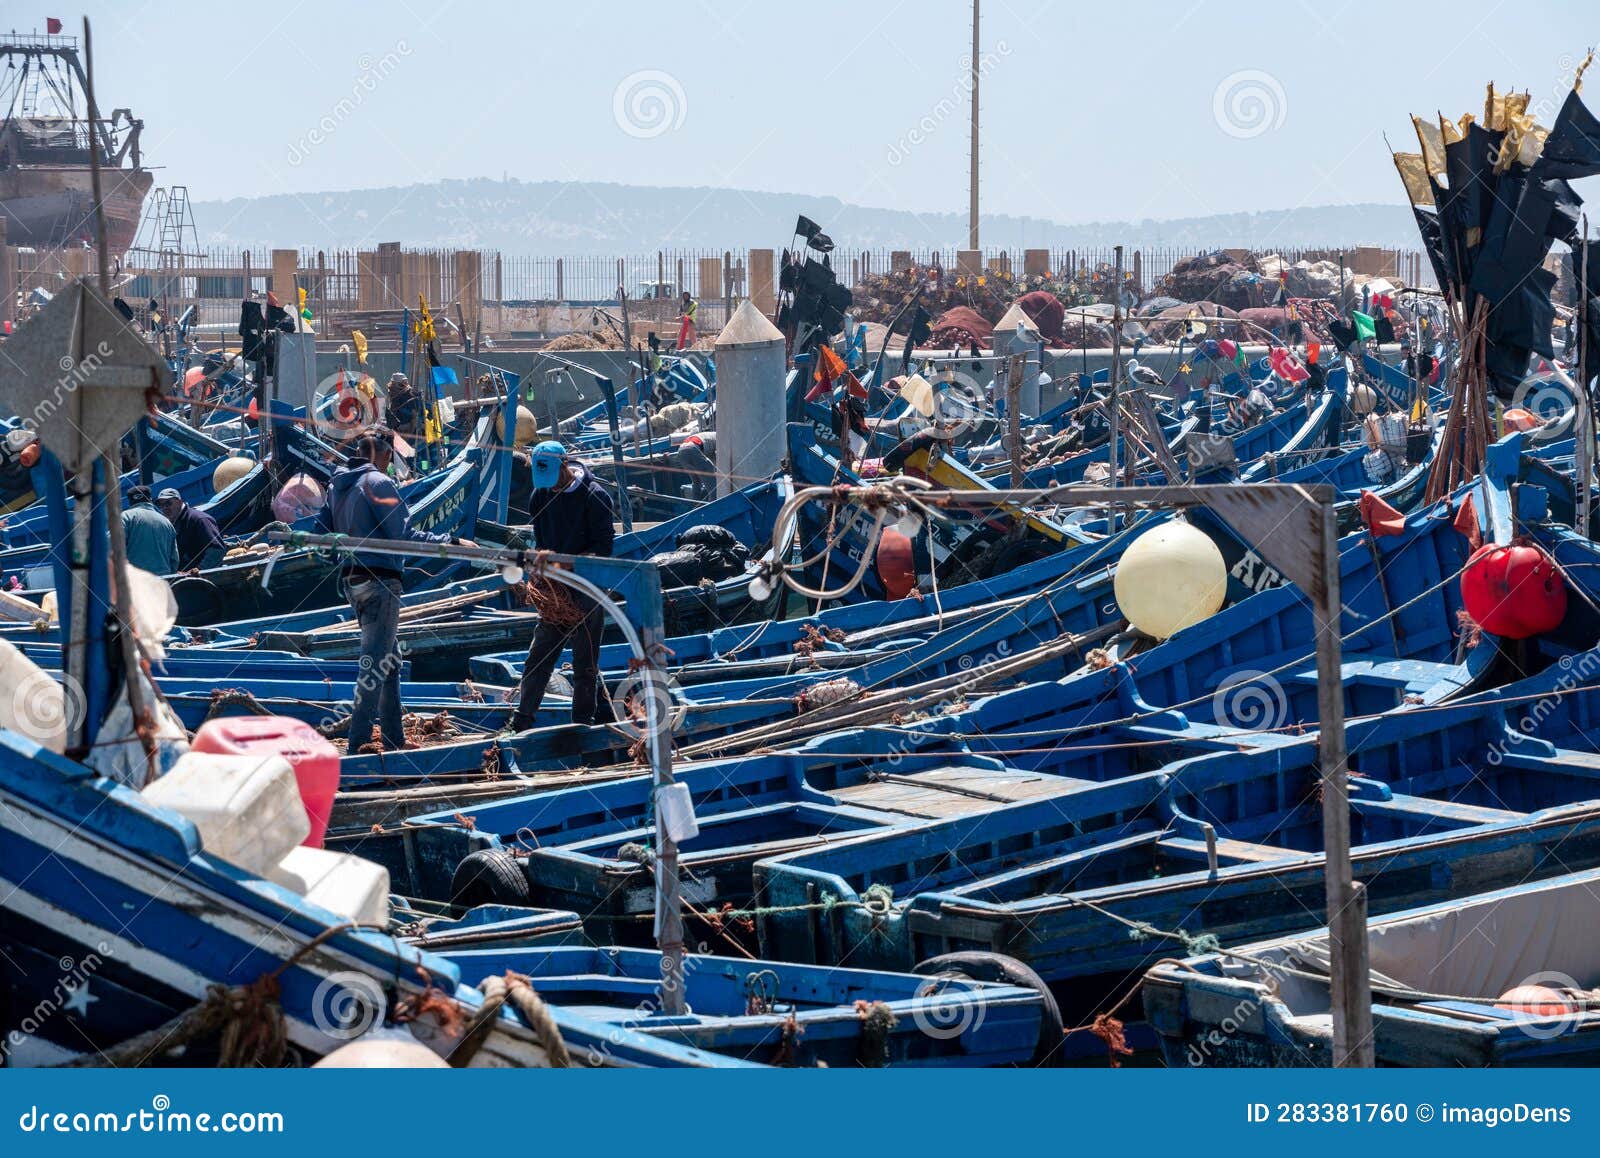 picturesque fisher boats at the harbor of essaouira in morocco